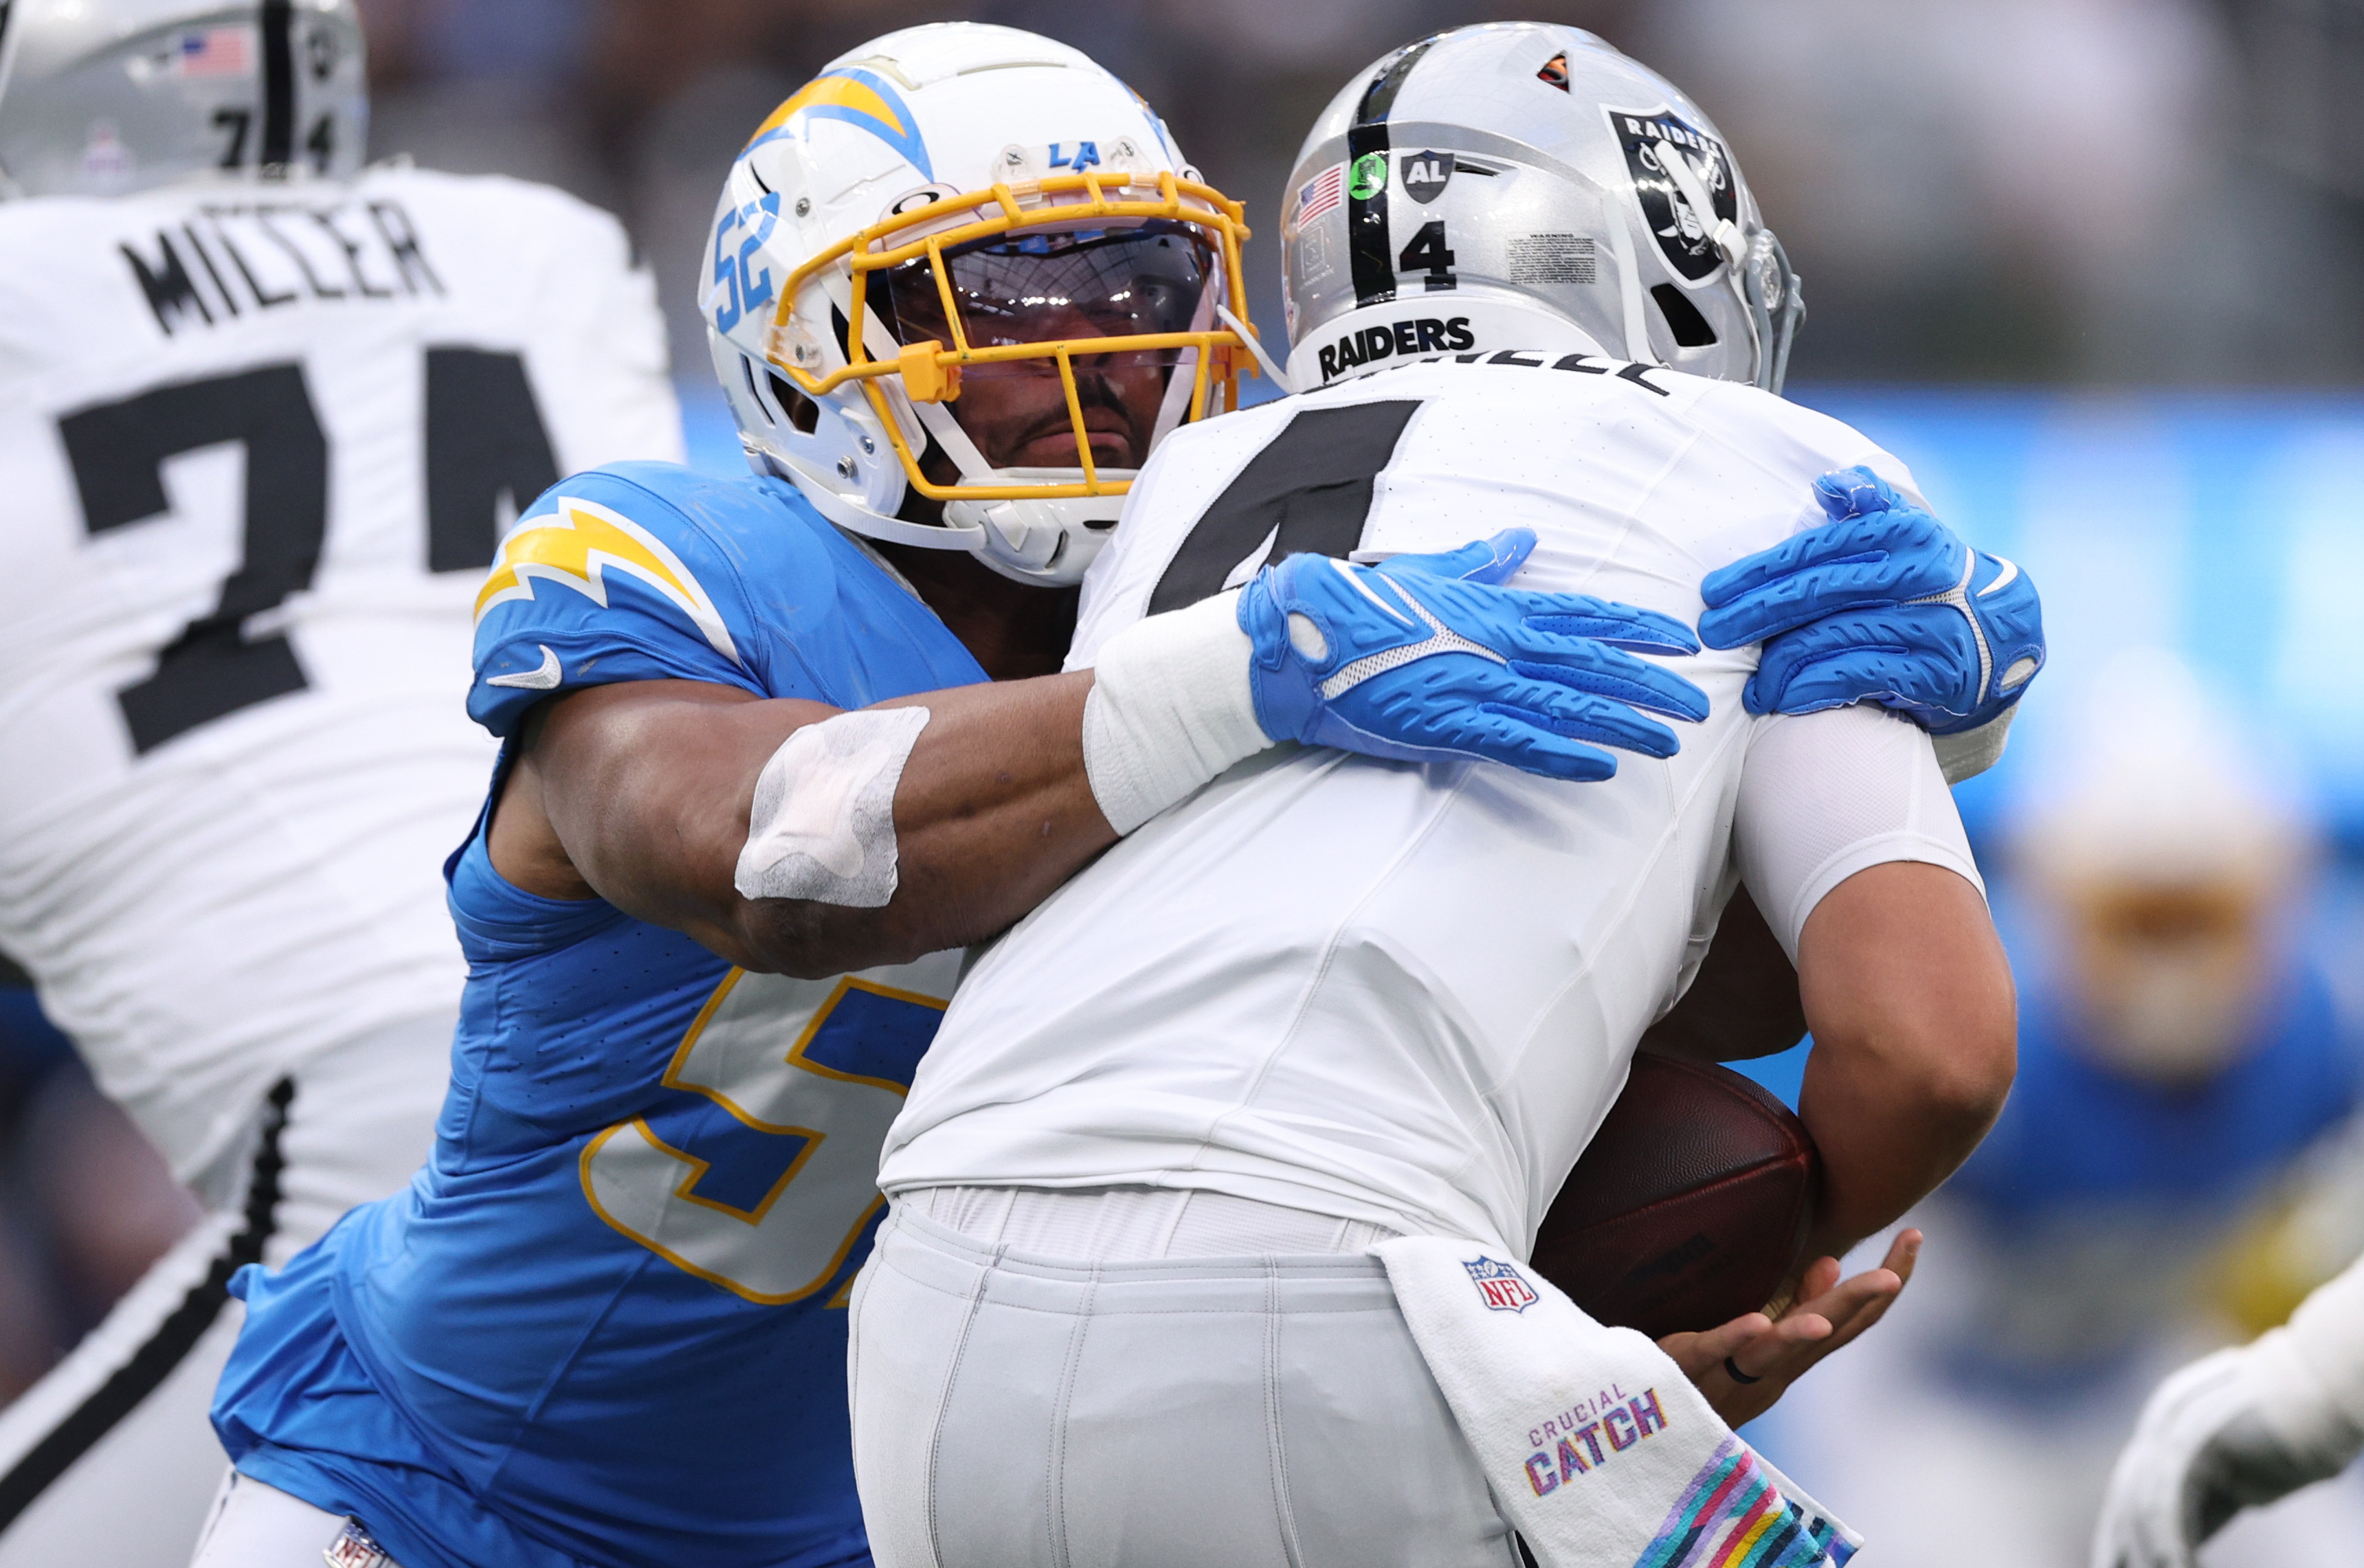 Chargers lineman records sack in his first-ever football game